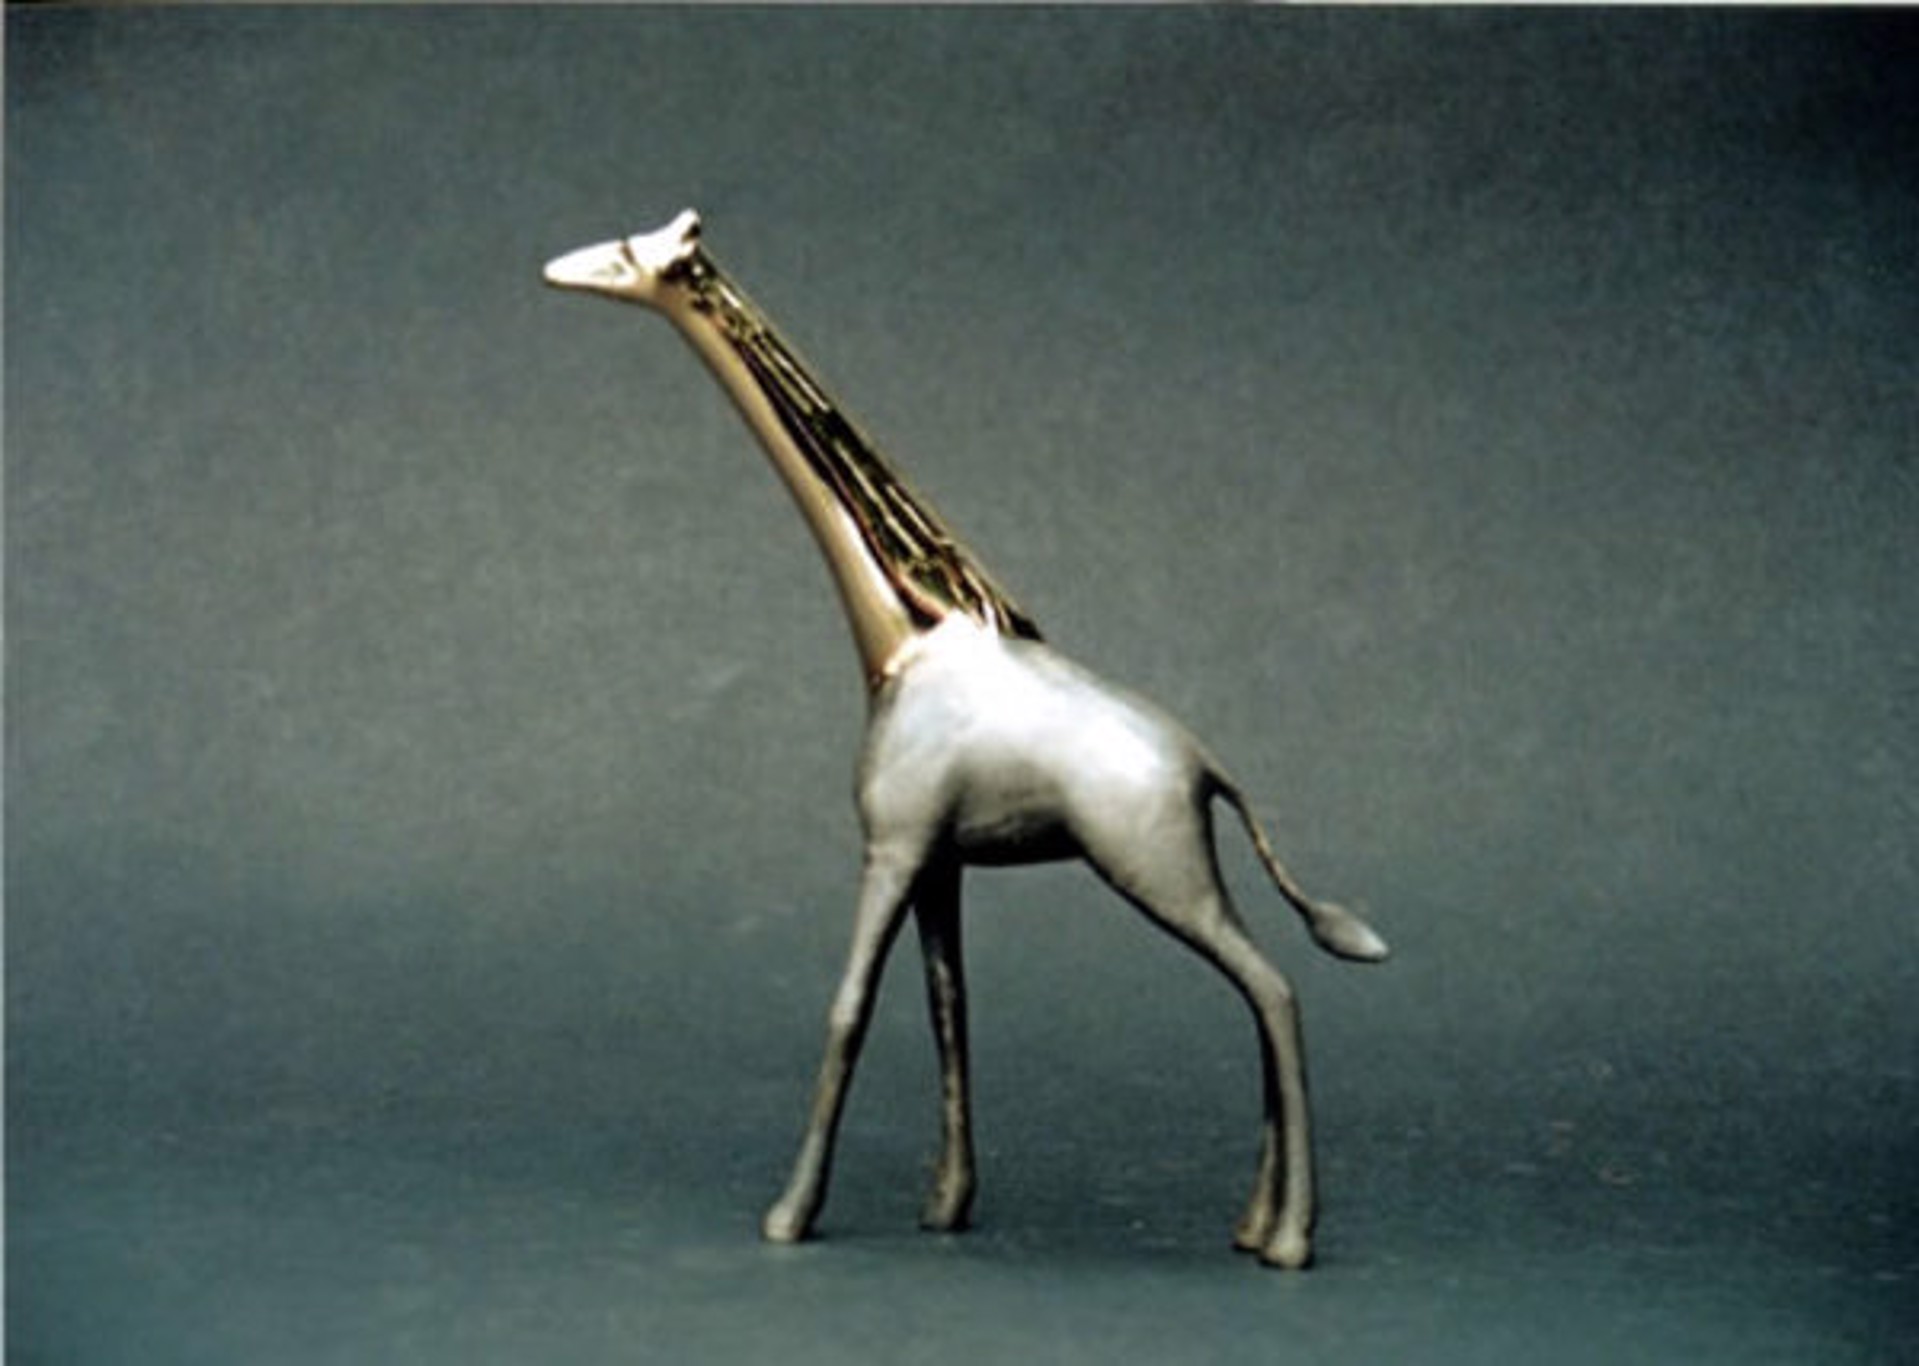 Giraffe, Small Standing - Caramel Polished Head and Neck by Loet Vanderveen